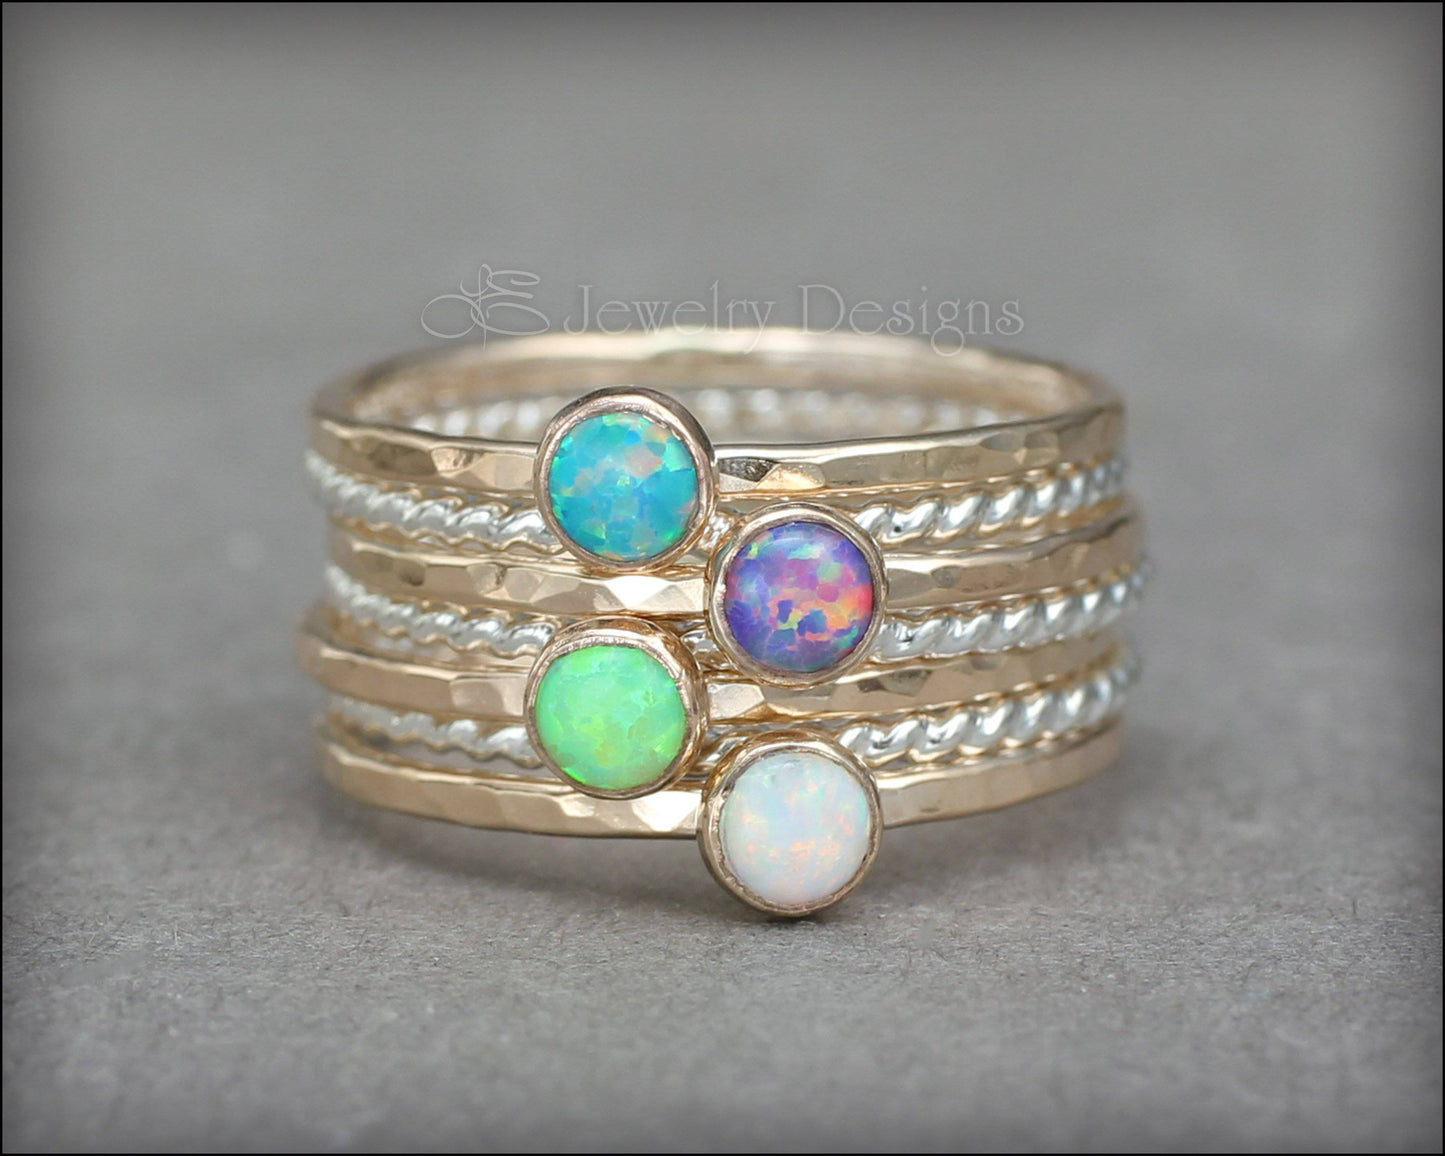 Opal Ring Set - (with 4 opals) - LE Jewelry Designs